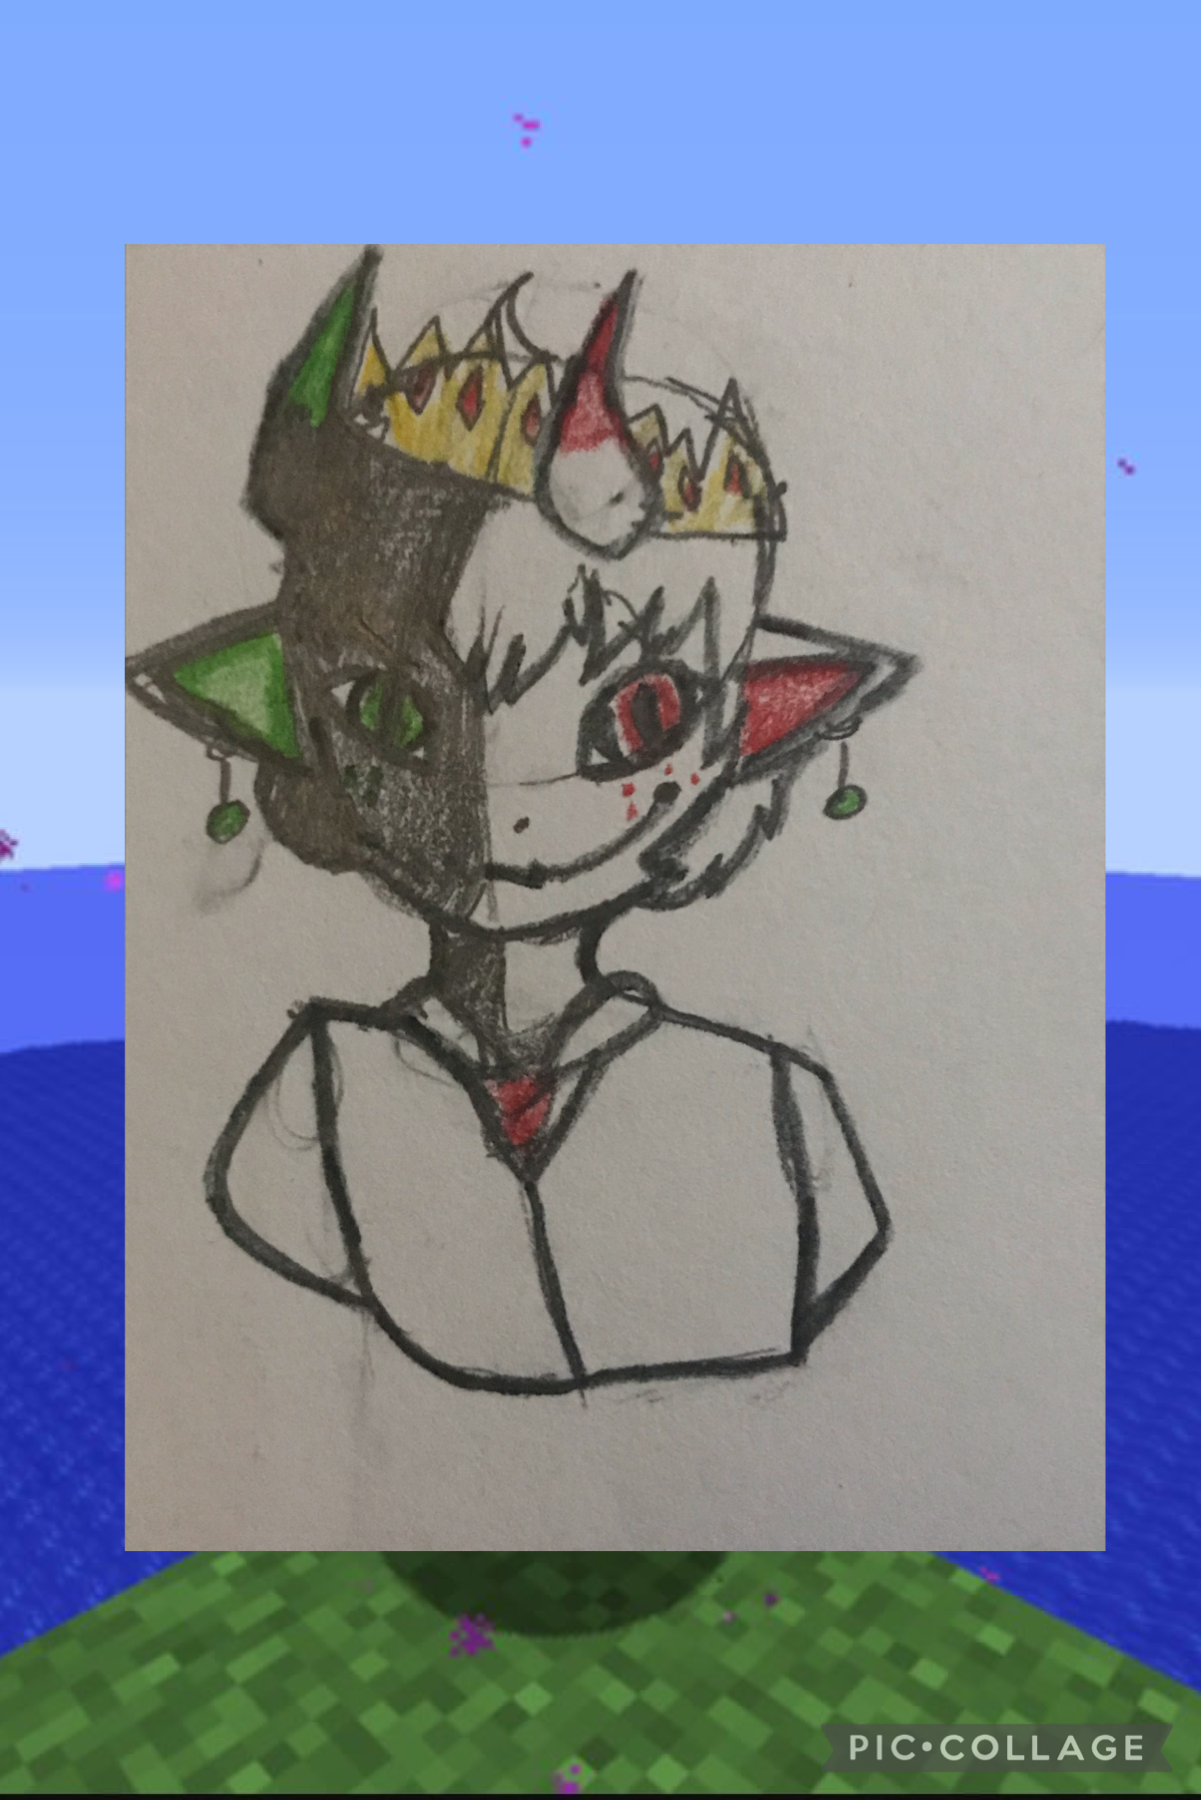 |tap| 
It’s ranboo yay! I saw zyysto’s design for him and I loved the design so I just did a quick drawing plus everyone is drawing mcyt’s so why not join in